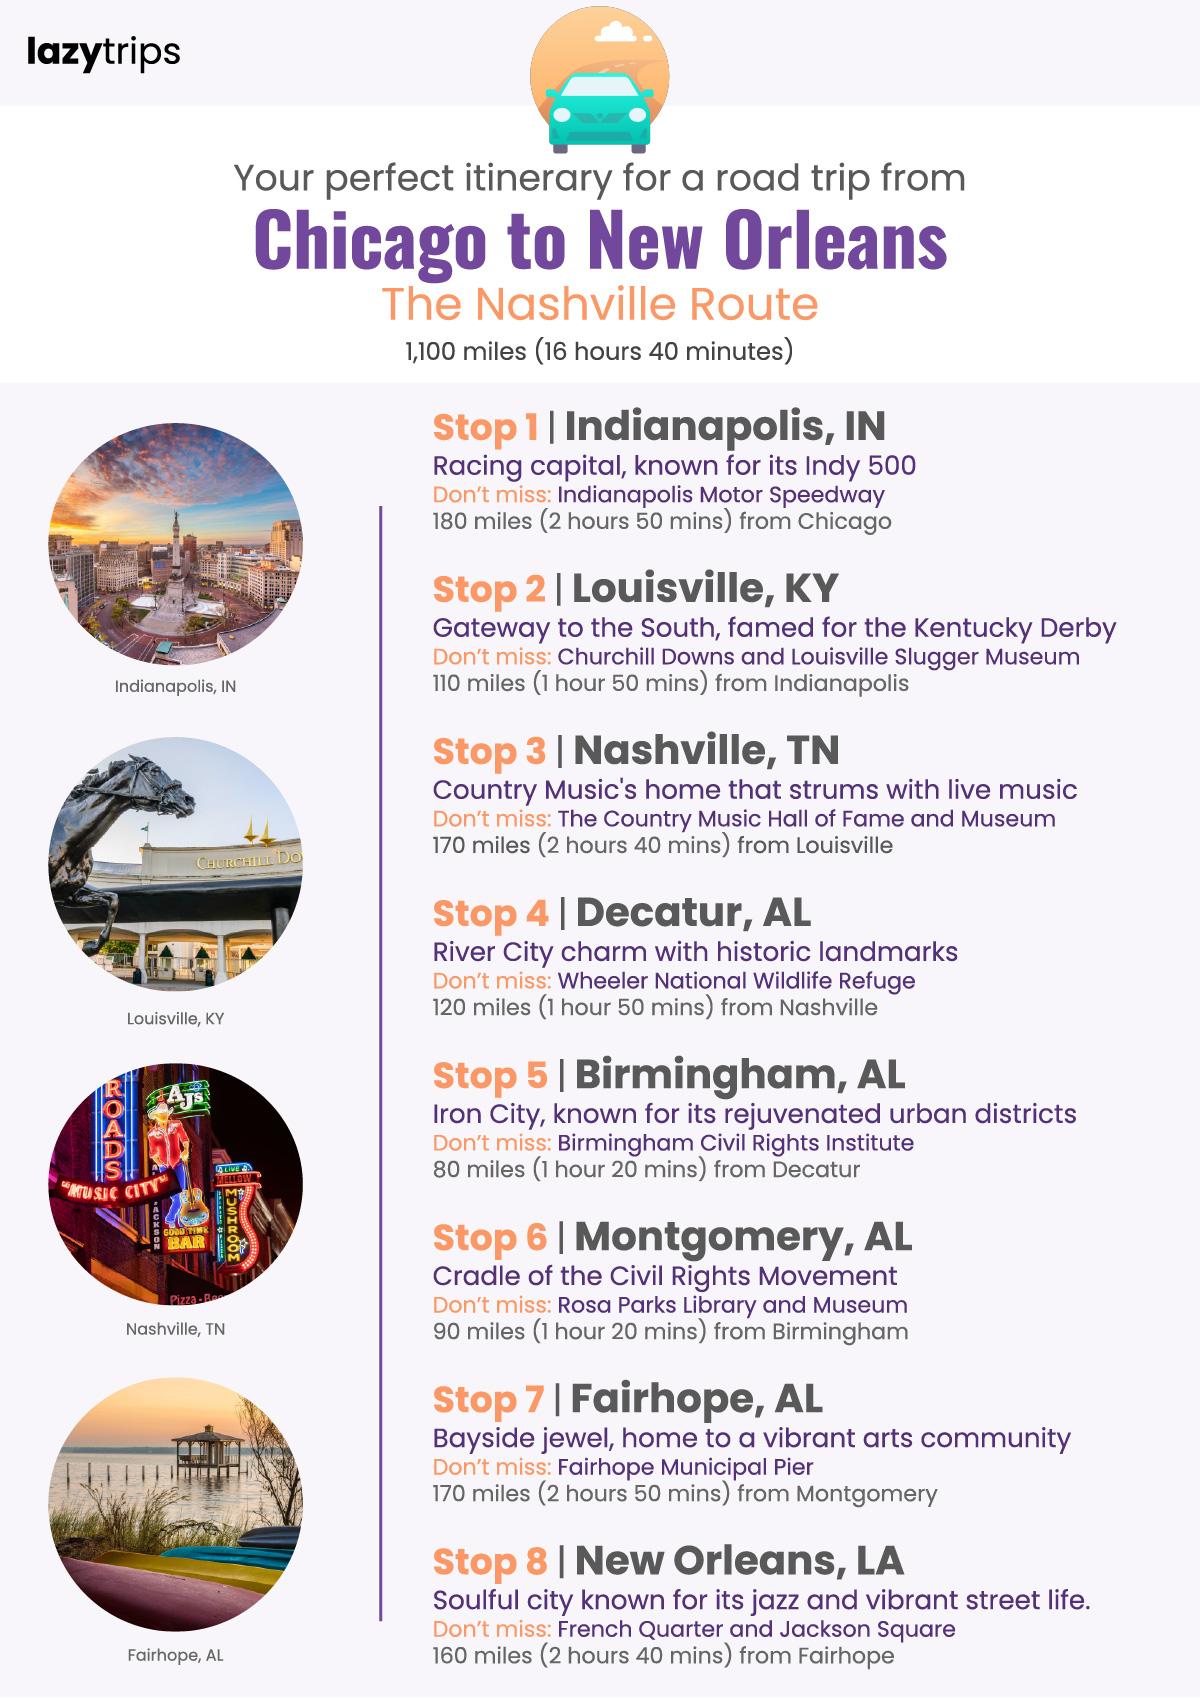 Itinerary for a road trip from Chicago to New Orleans, stopping in Indianapolis, Louisville, Nashville, Decatur, Birmingham, Montgomery, Fairhope and New Orleans